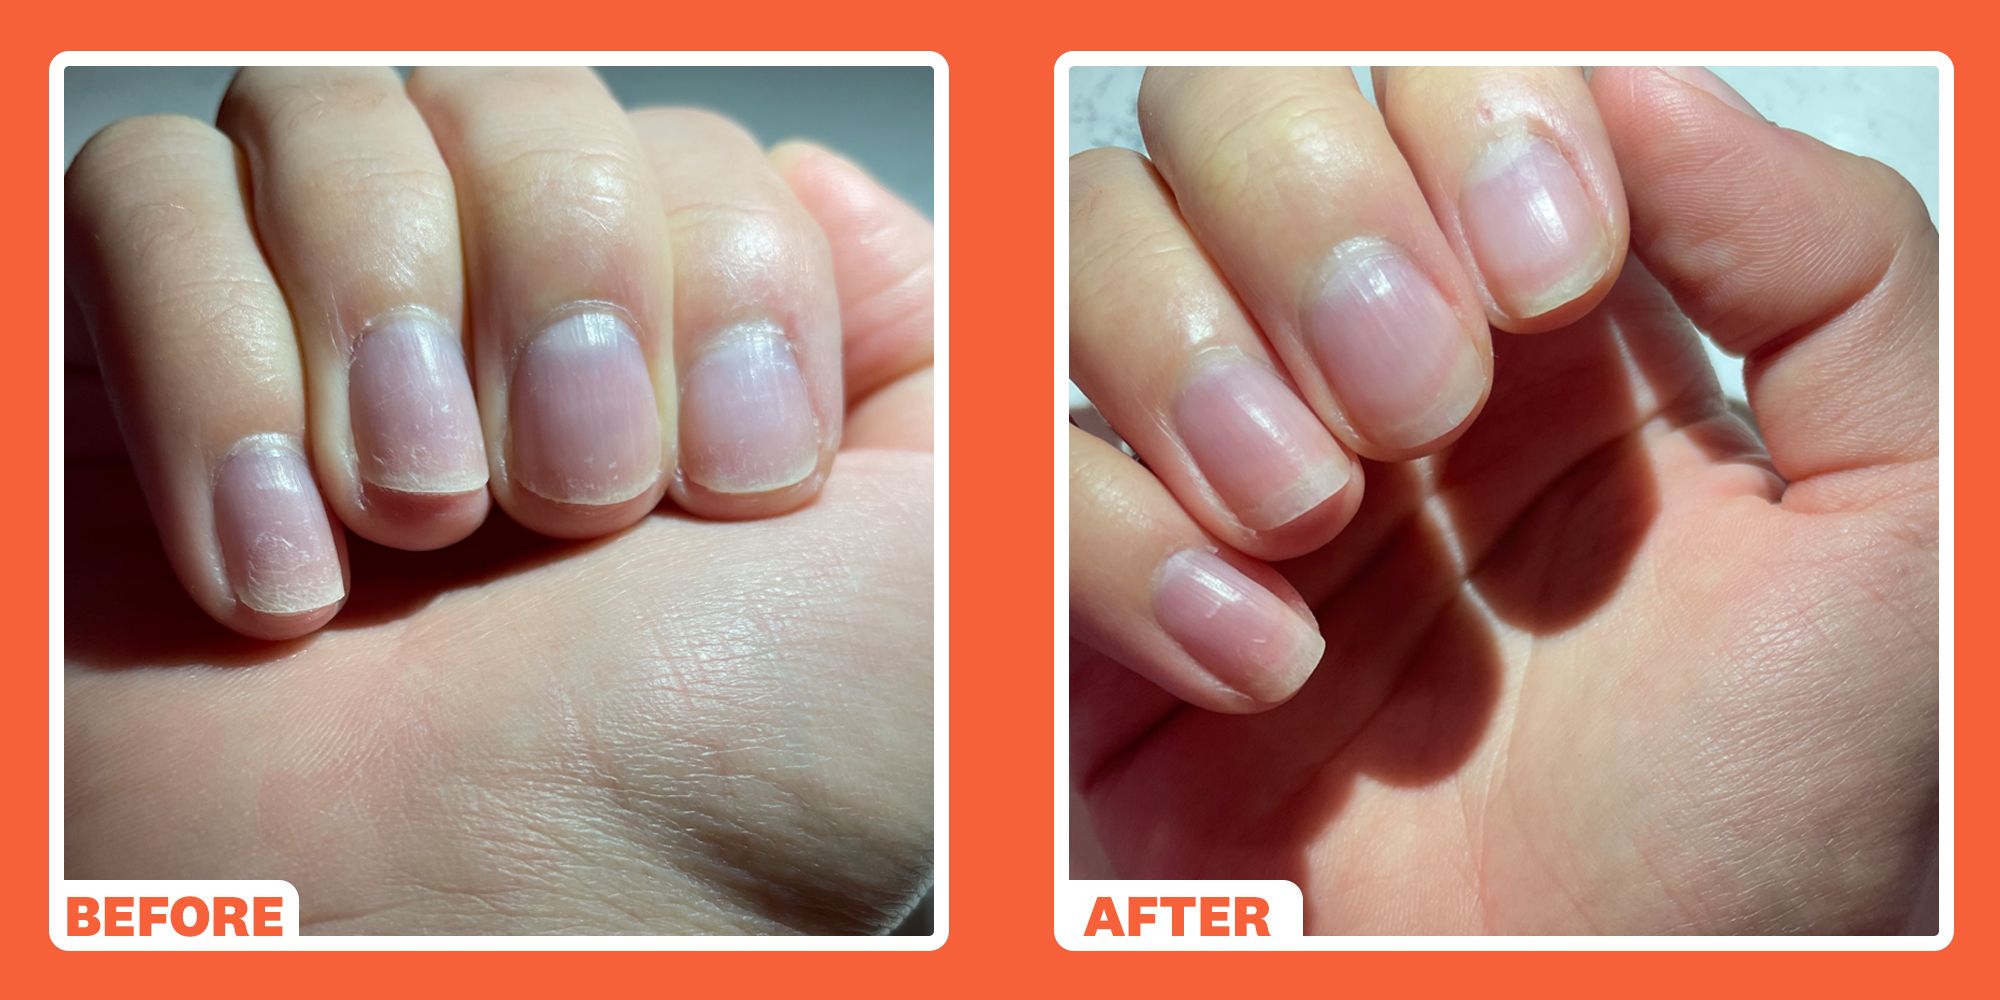 'I Tried Dr. Pawpaw Original Balm And It Transformed My Dry, Scarred Nails'